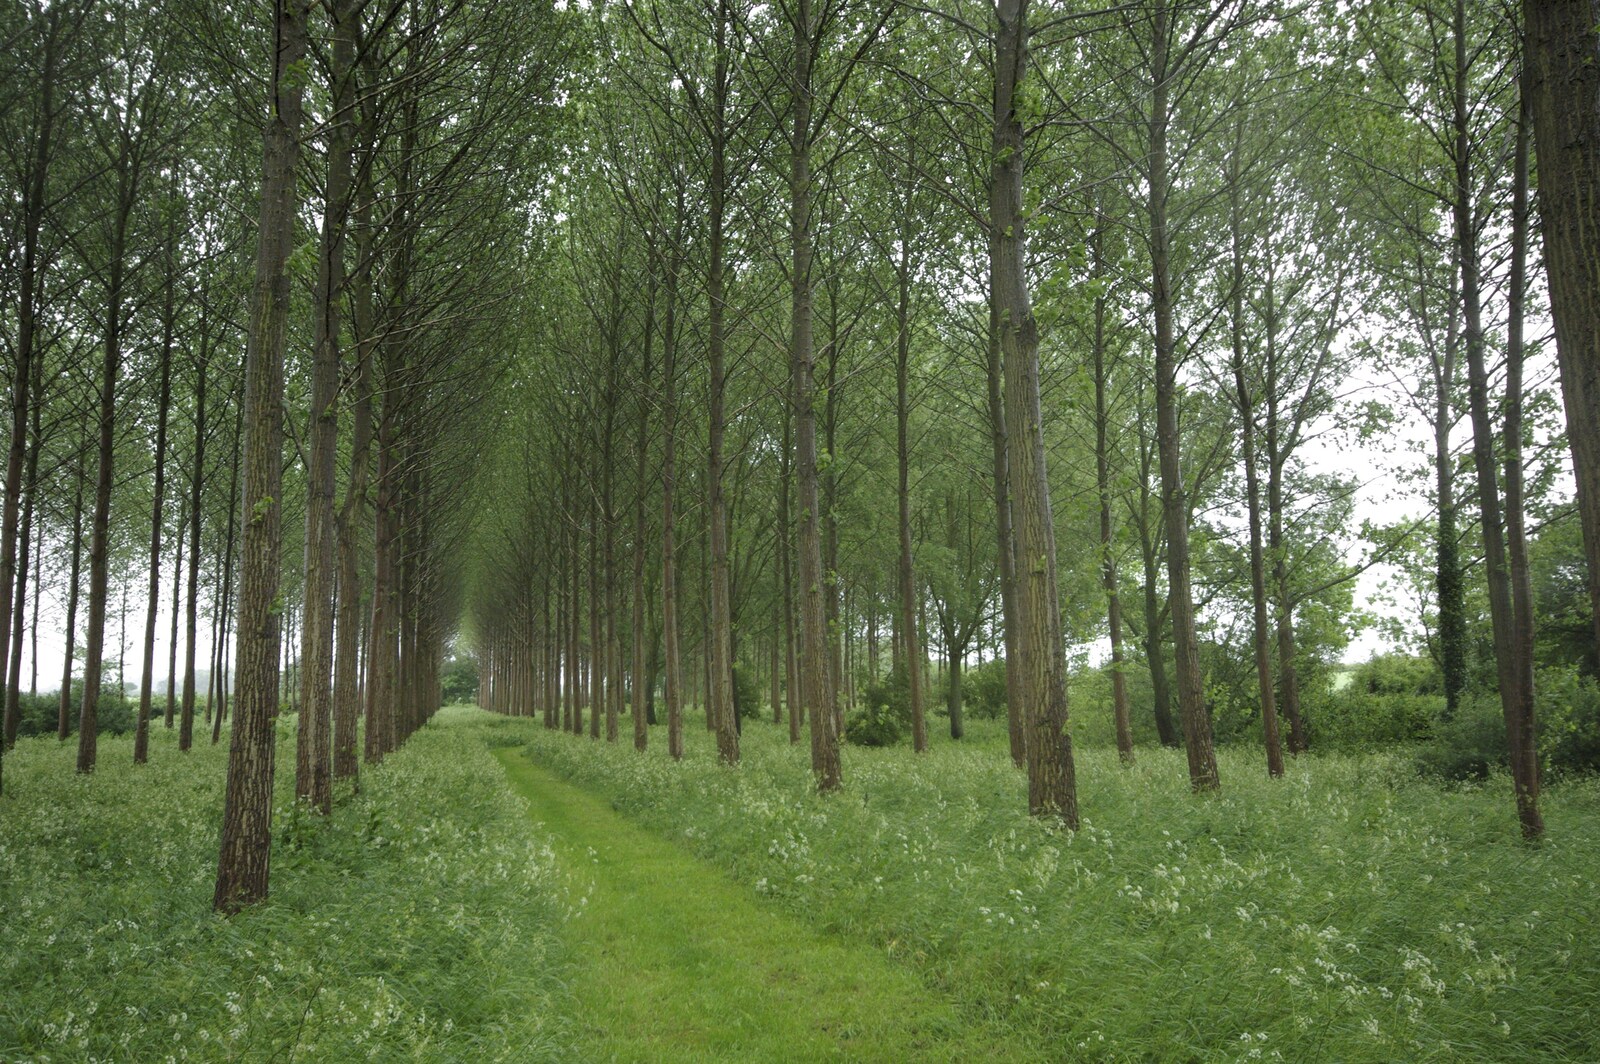 Nosher's Birthday Trip, New Milton, Hampshire - 26th May 2007: Lined-up trees in Finningham